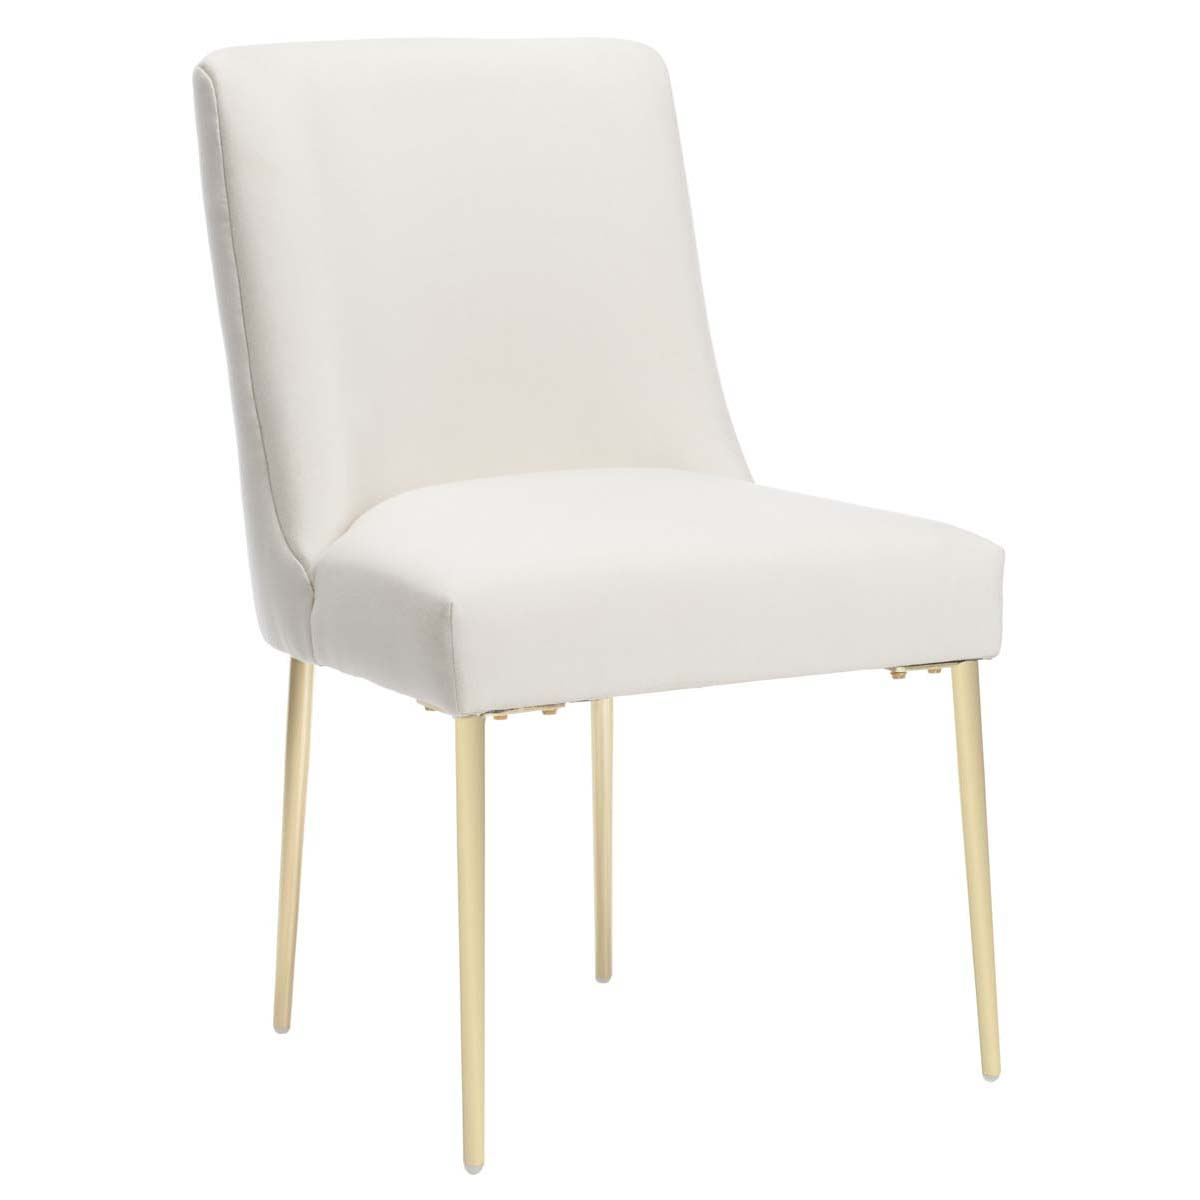 Safavieh Couture Nolita Dining Chair - Off White